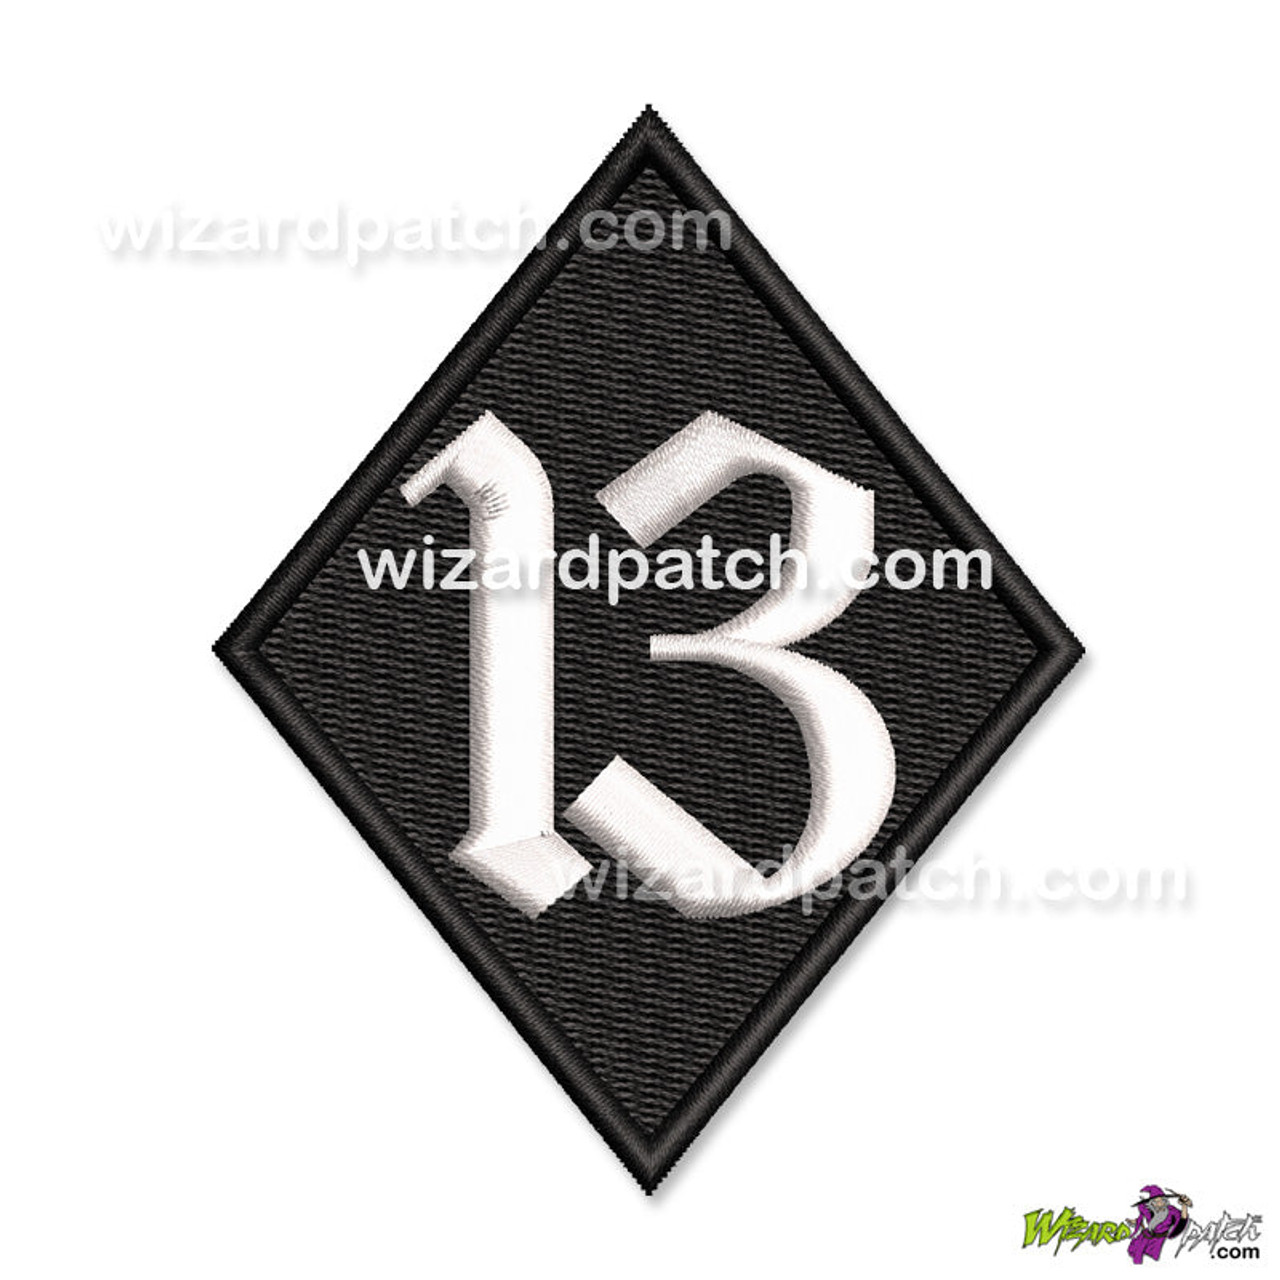 DAVIDSON REAL LEATHER SEW ON LETTERS - Wizard Patch